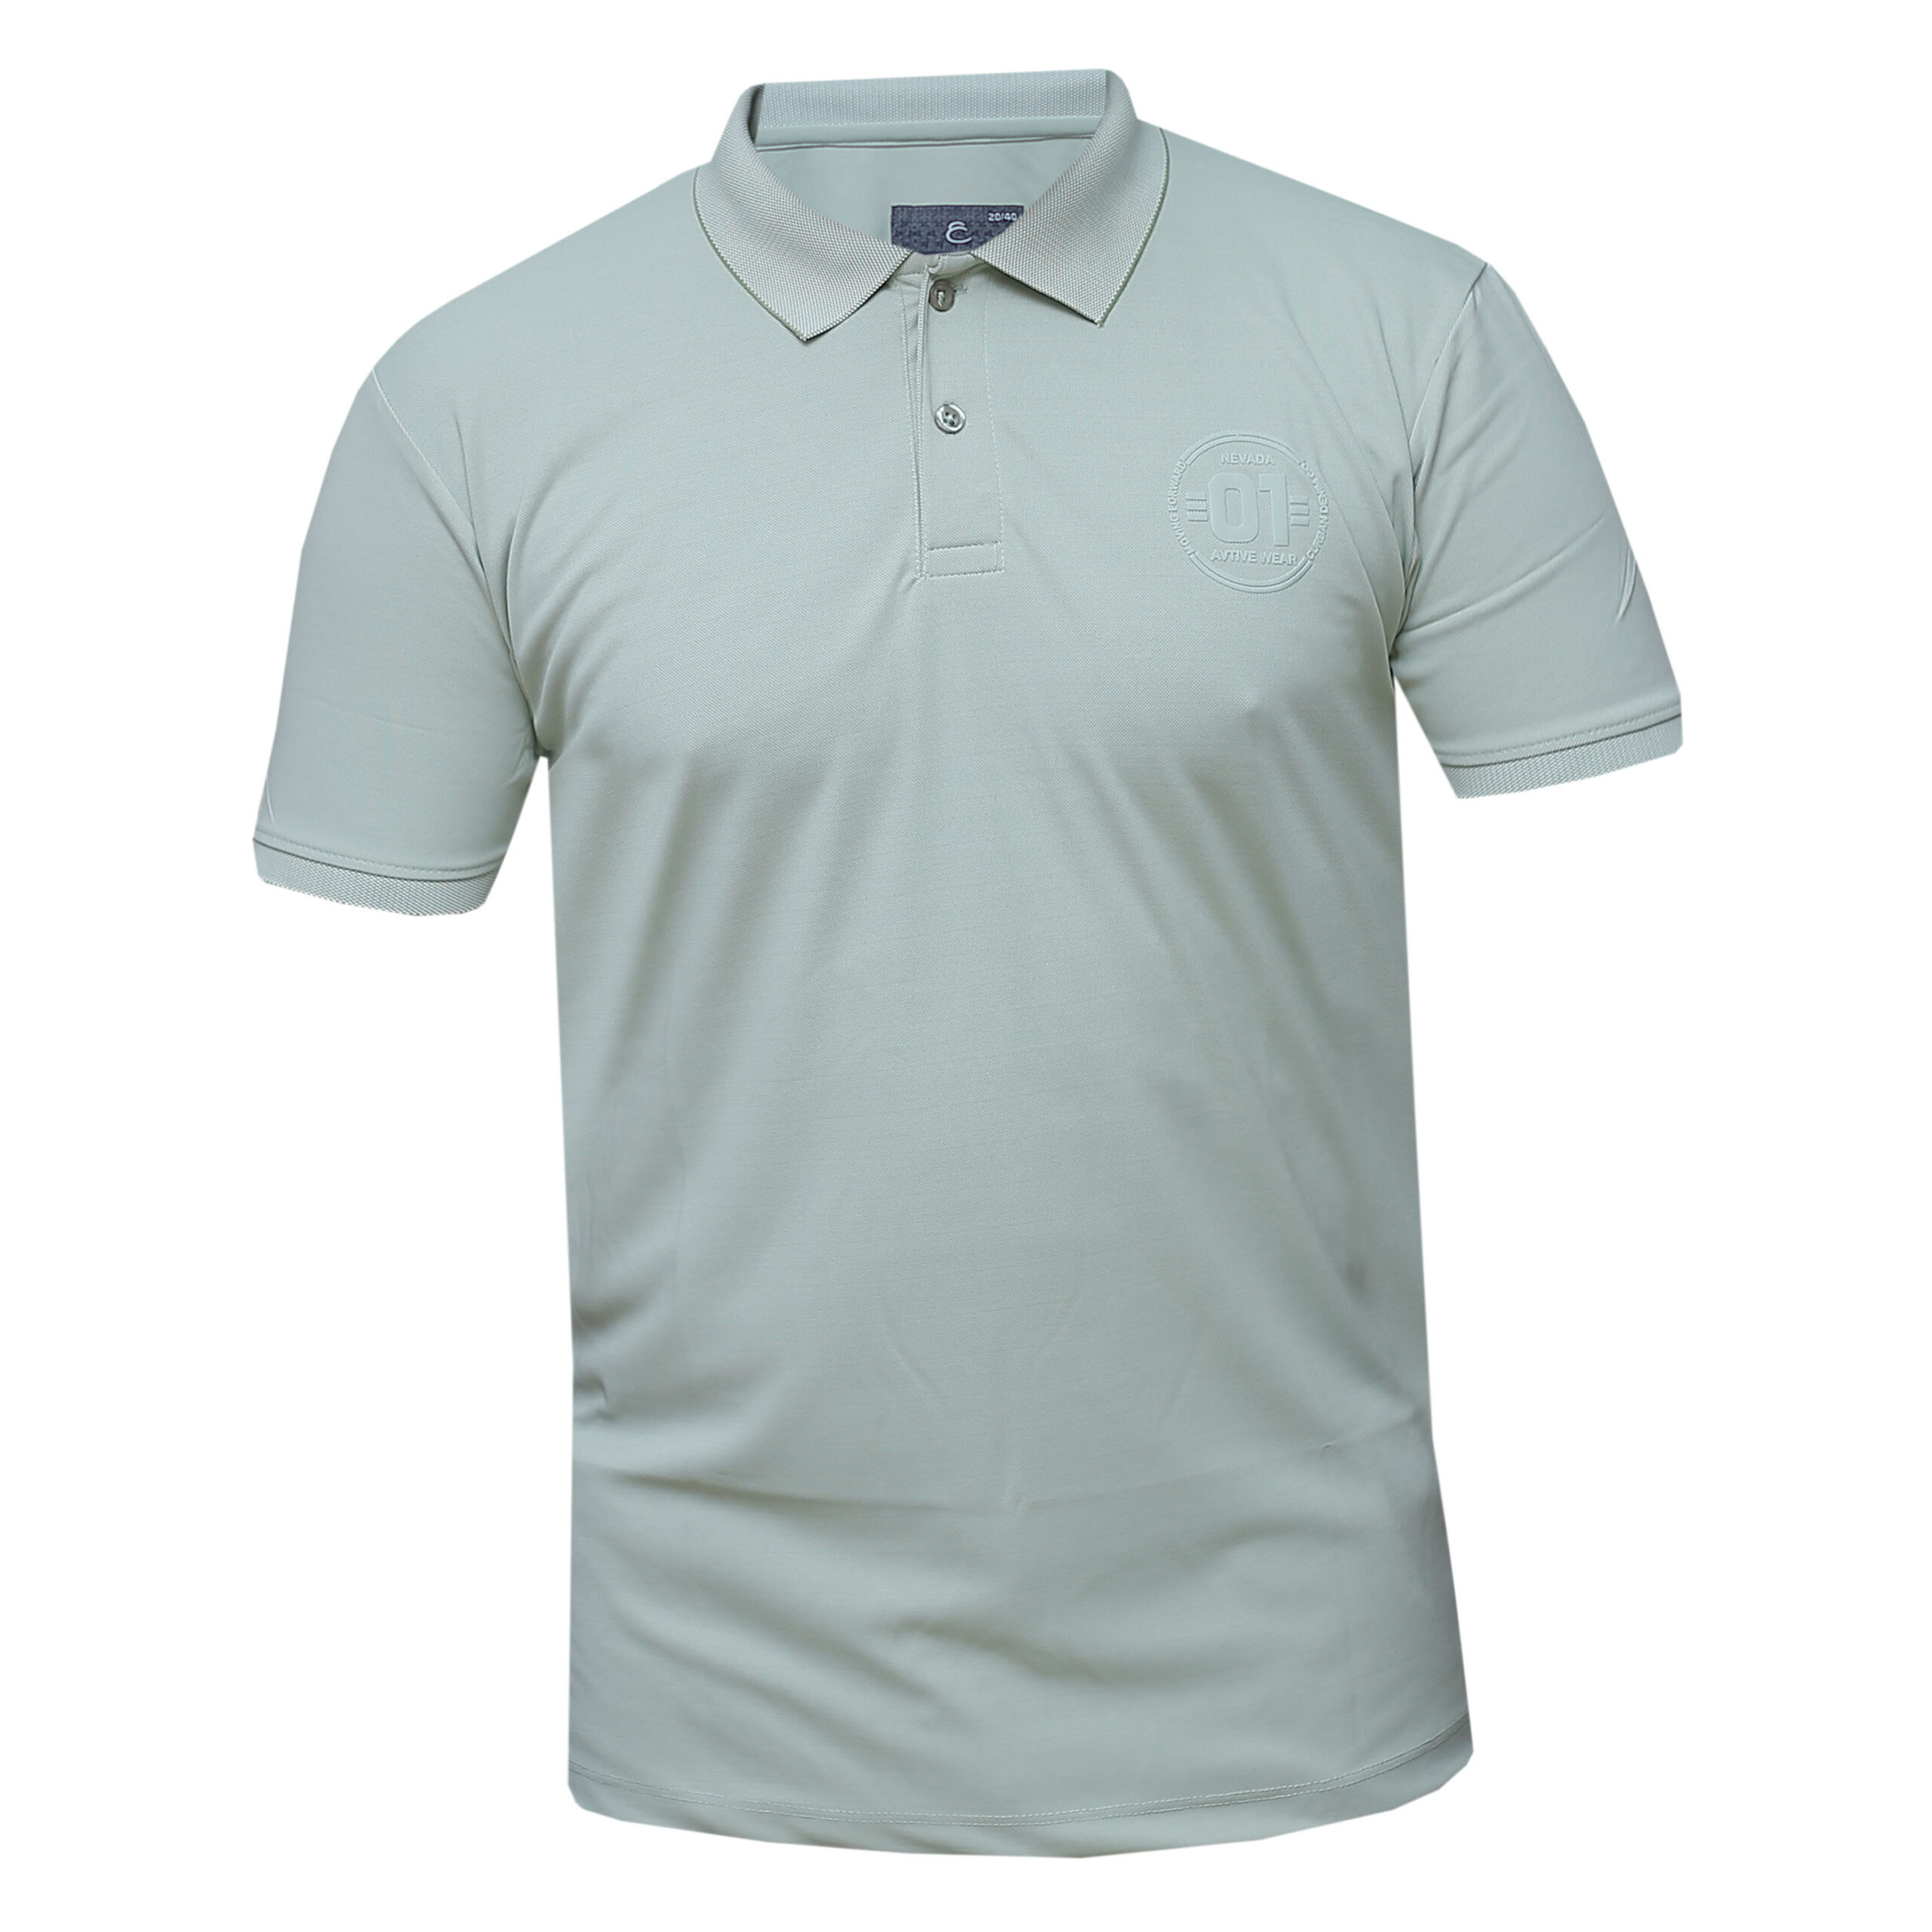 Everyday Collar Tees for Men - Quality Polos